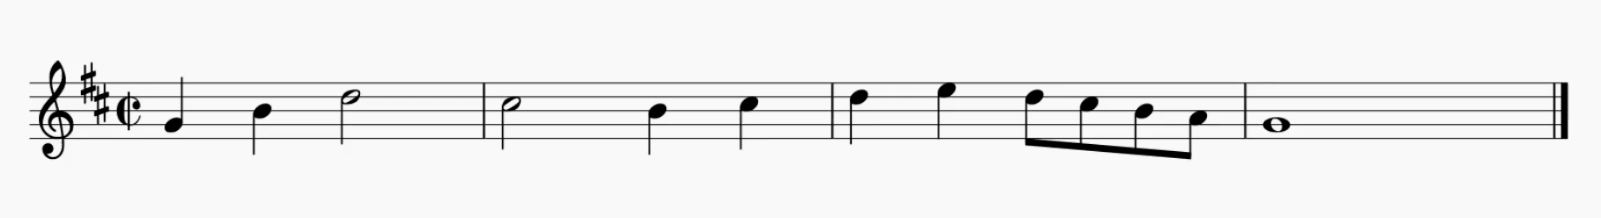 The 2/2 time signature